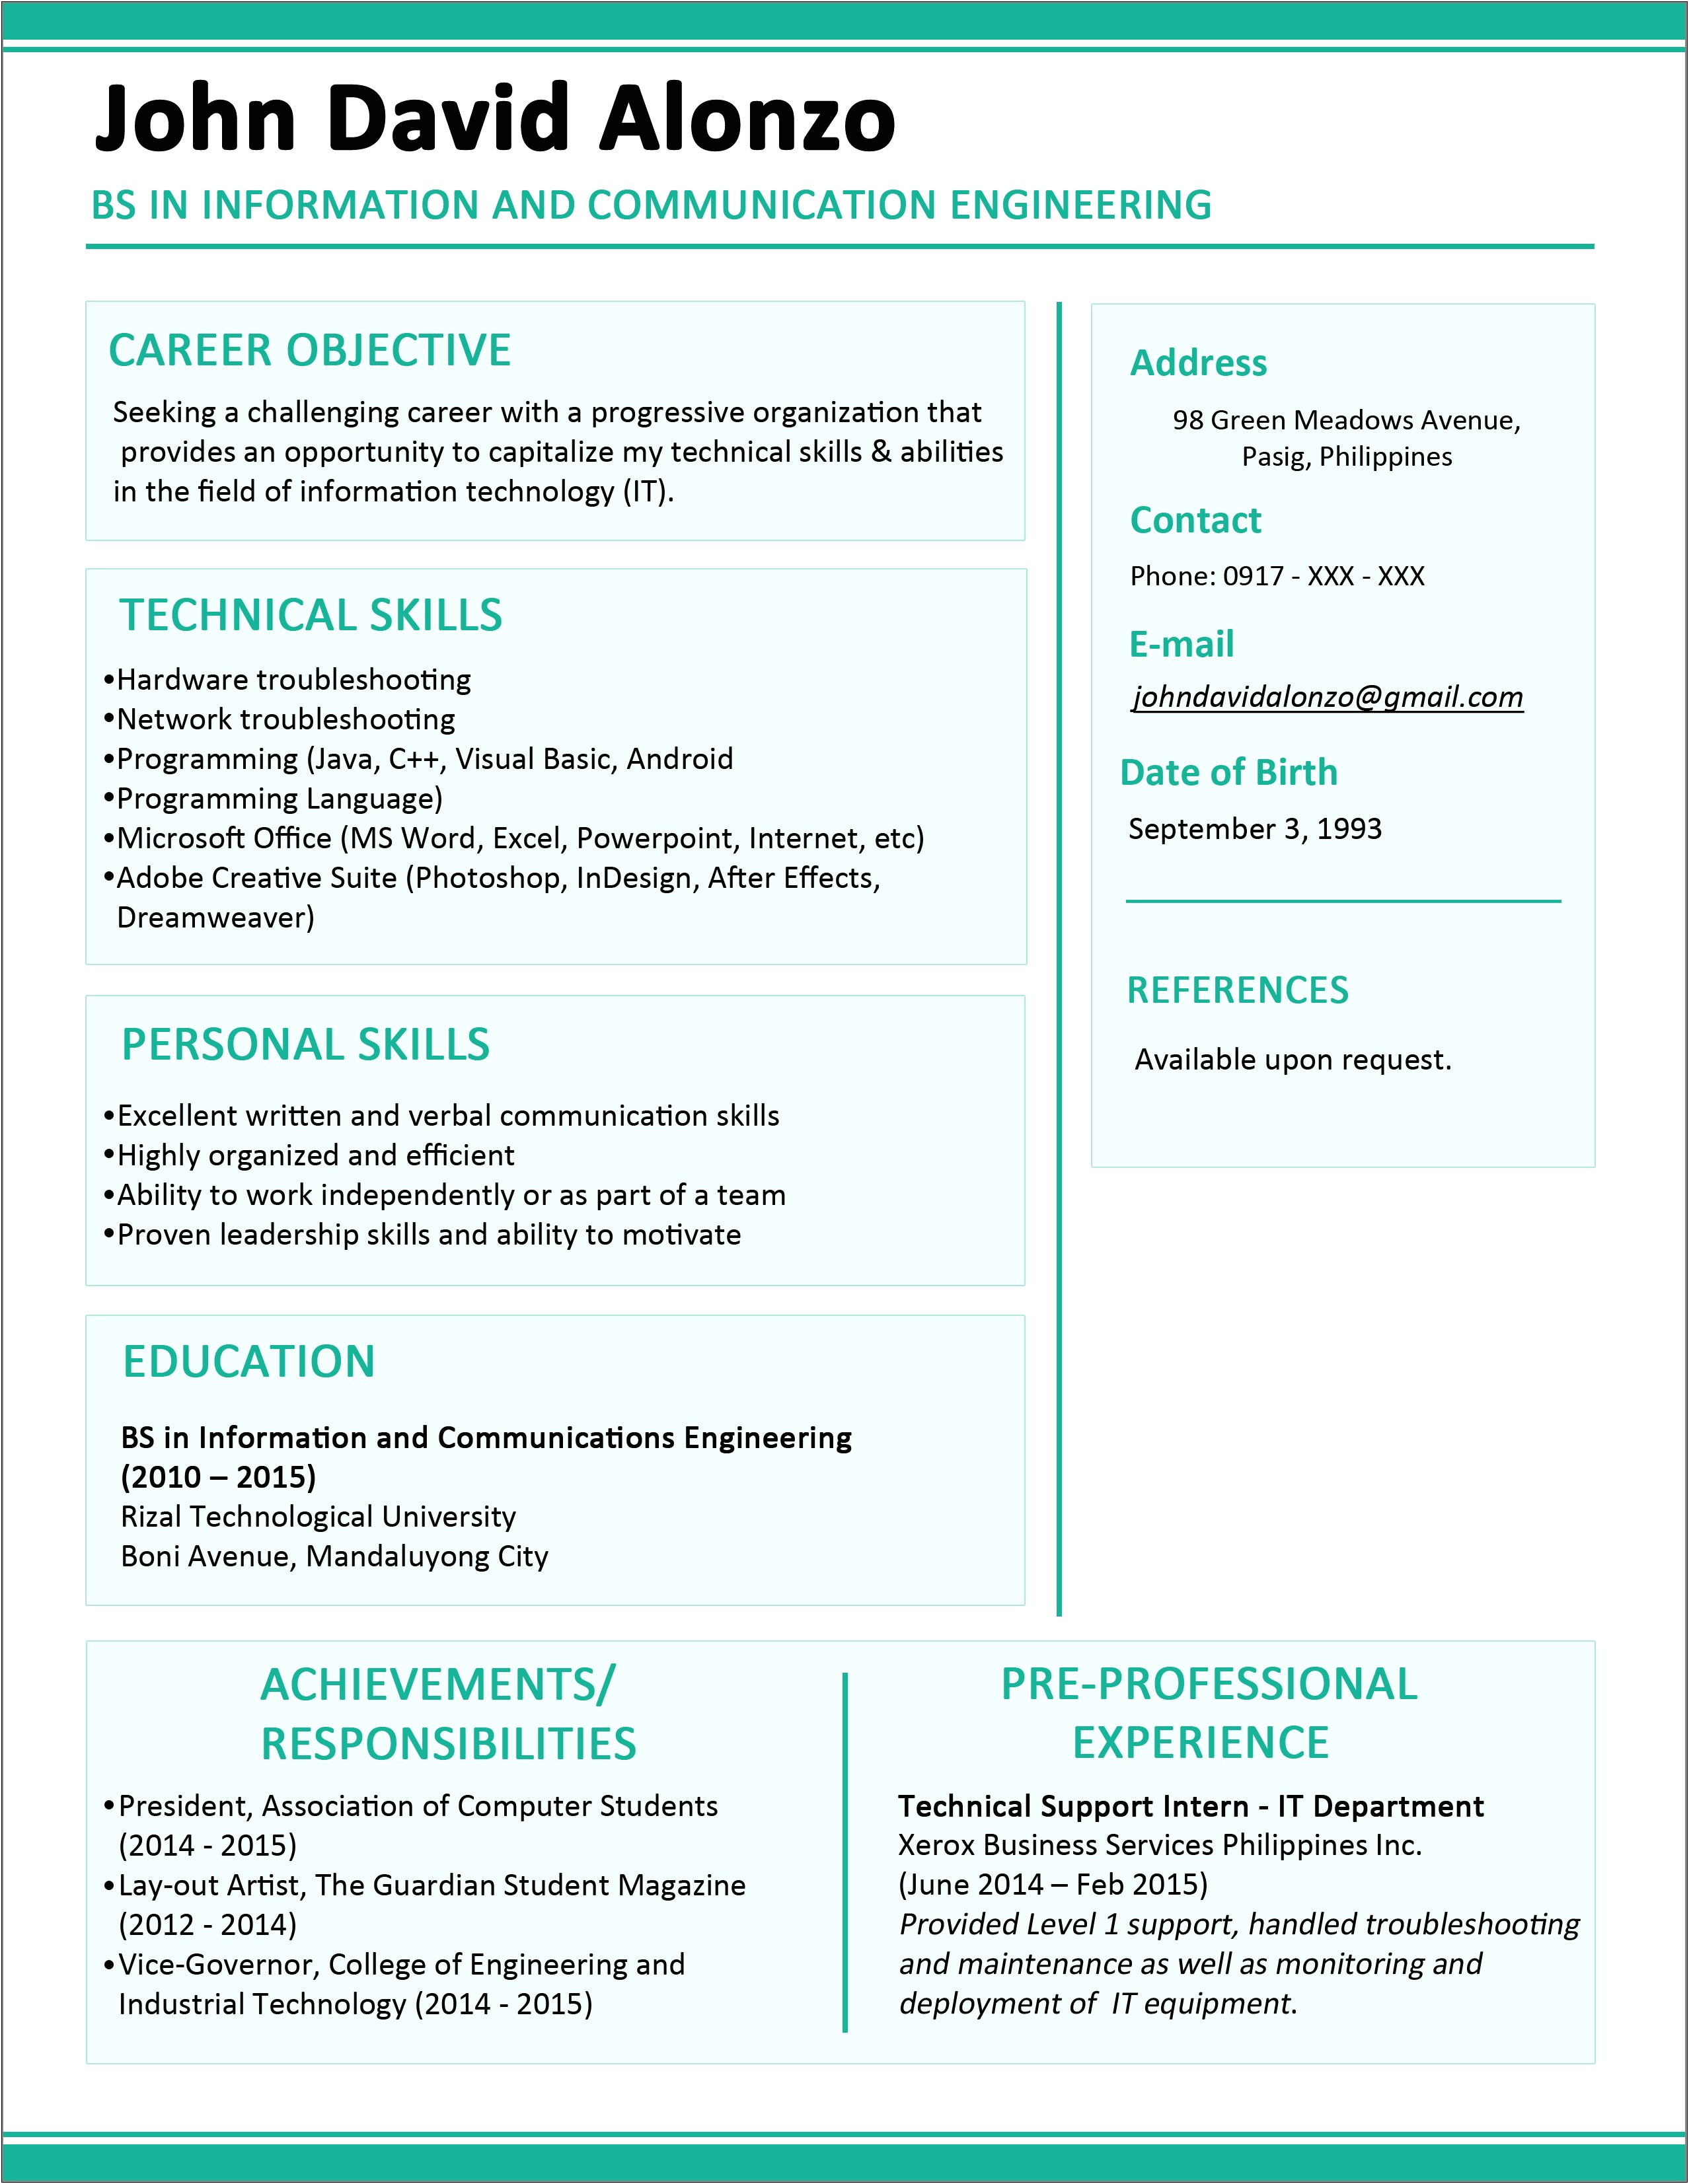 Objectives For Resume With Little Experience Samples